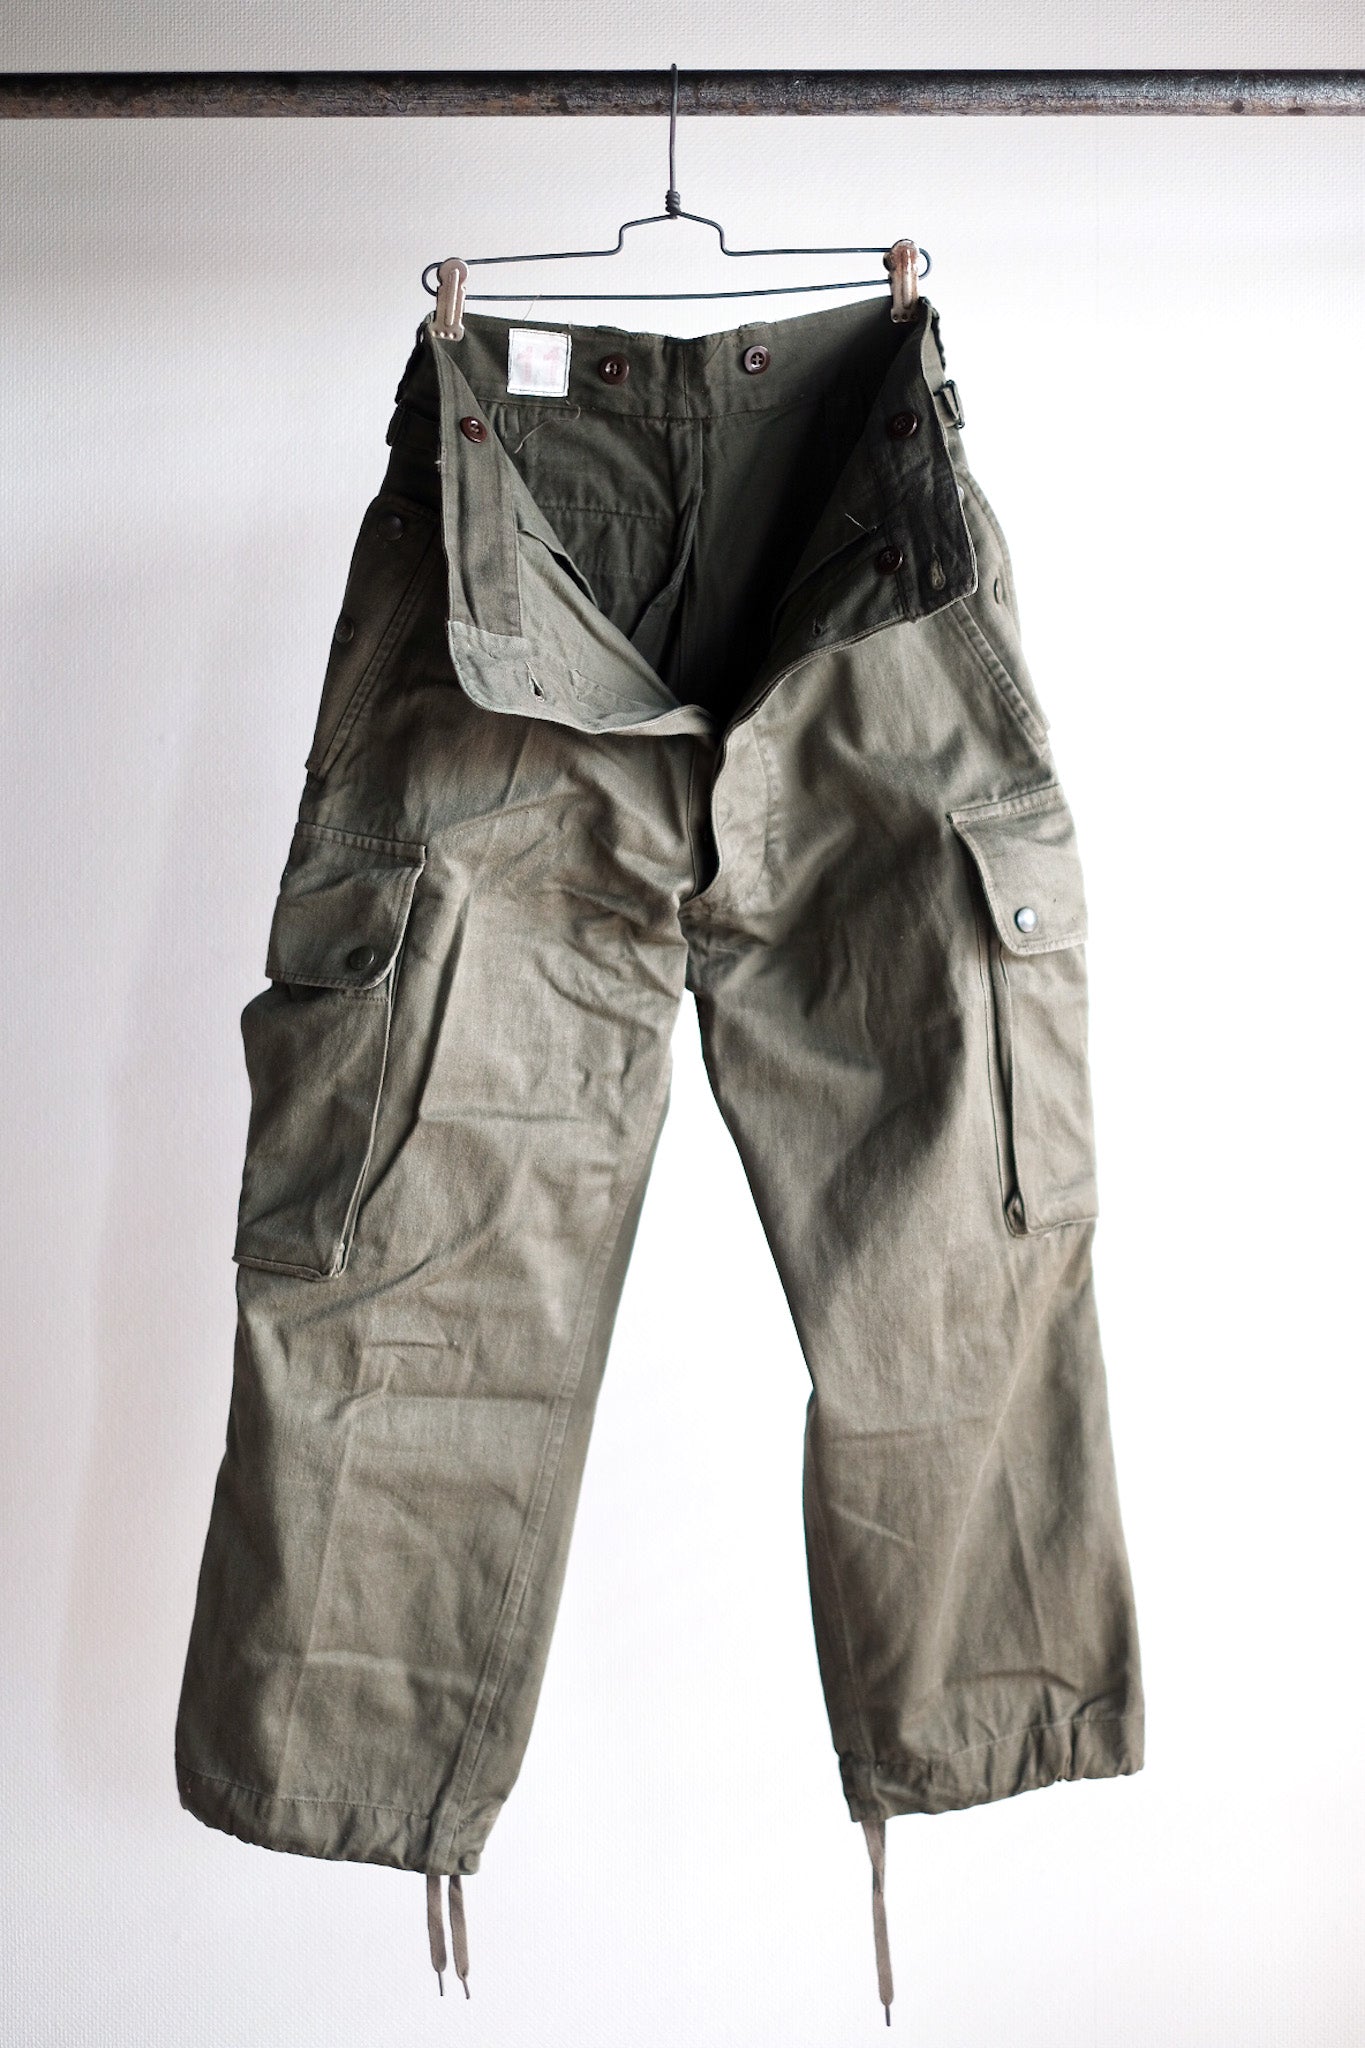 [~ 60's] French Army Tap47/56 ParaTrooper Trousers Size.11